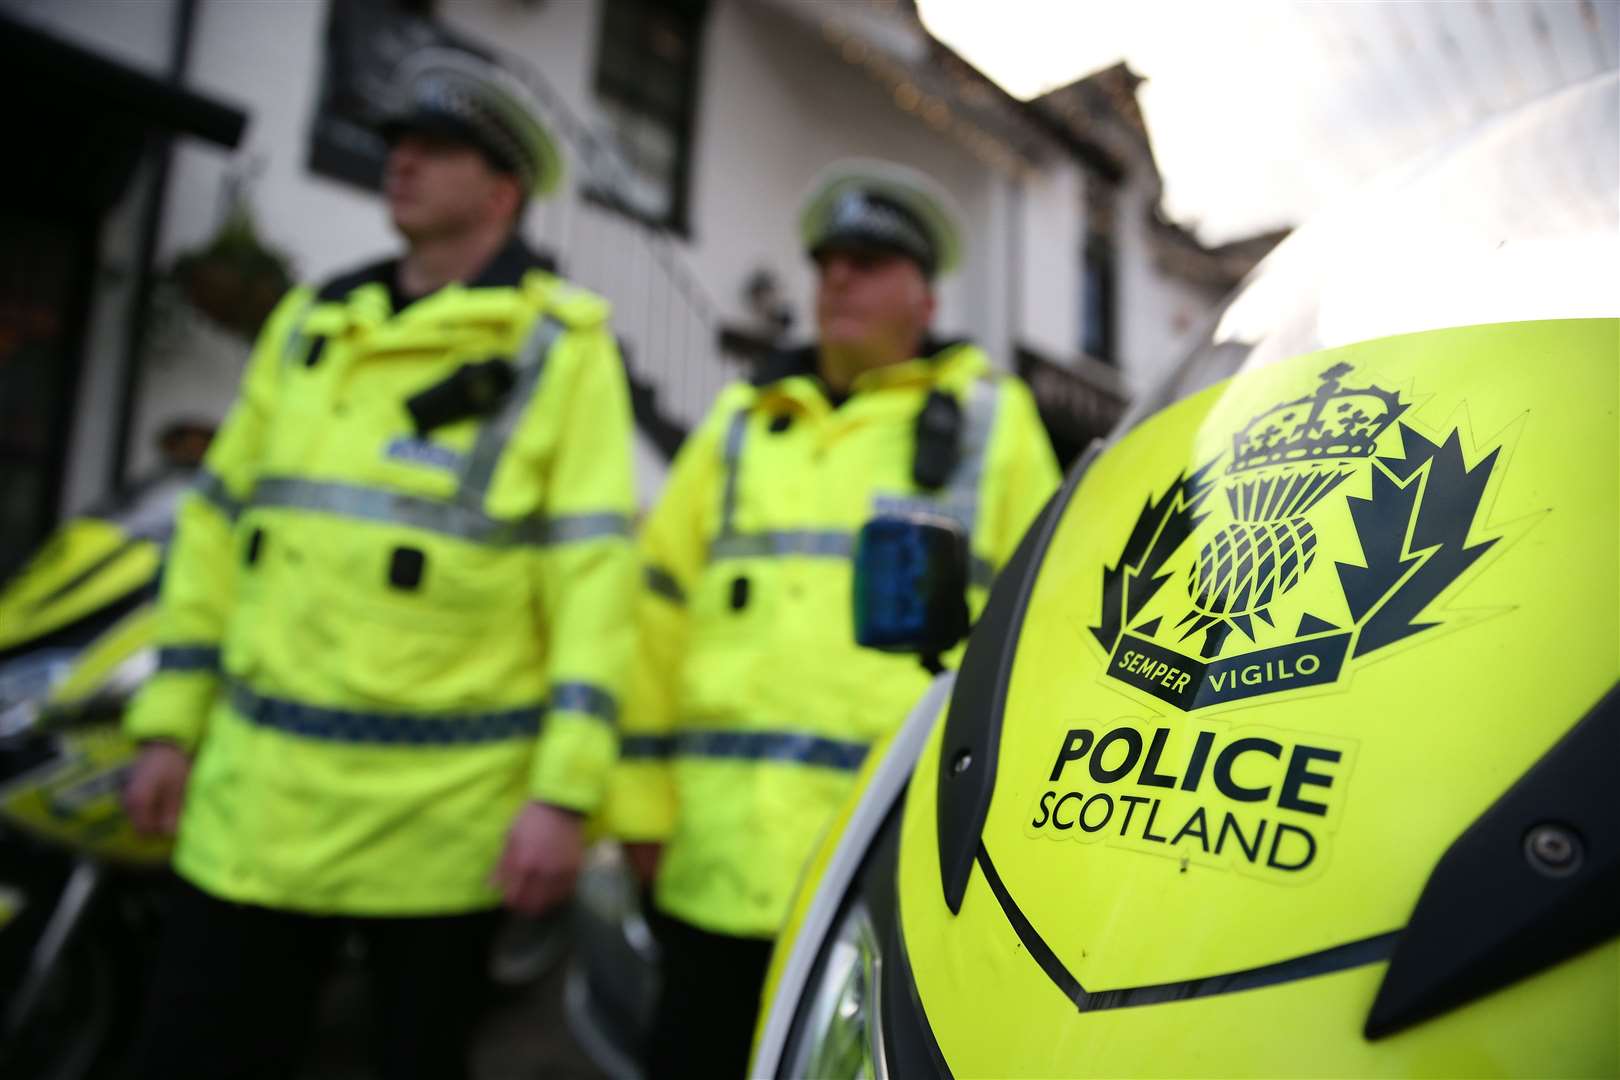 Police Scotland will enforce new hate crime laws in a ‘measured way’ the Chief Constable has said (Andrew Milligan/PA)